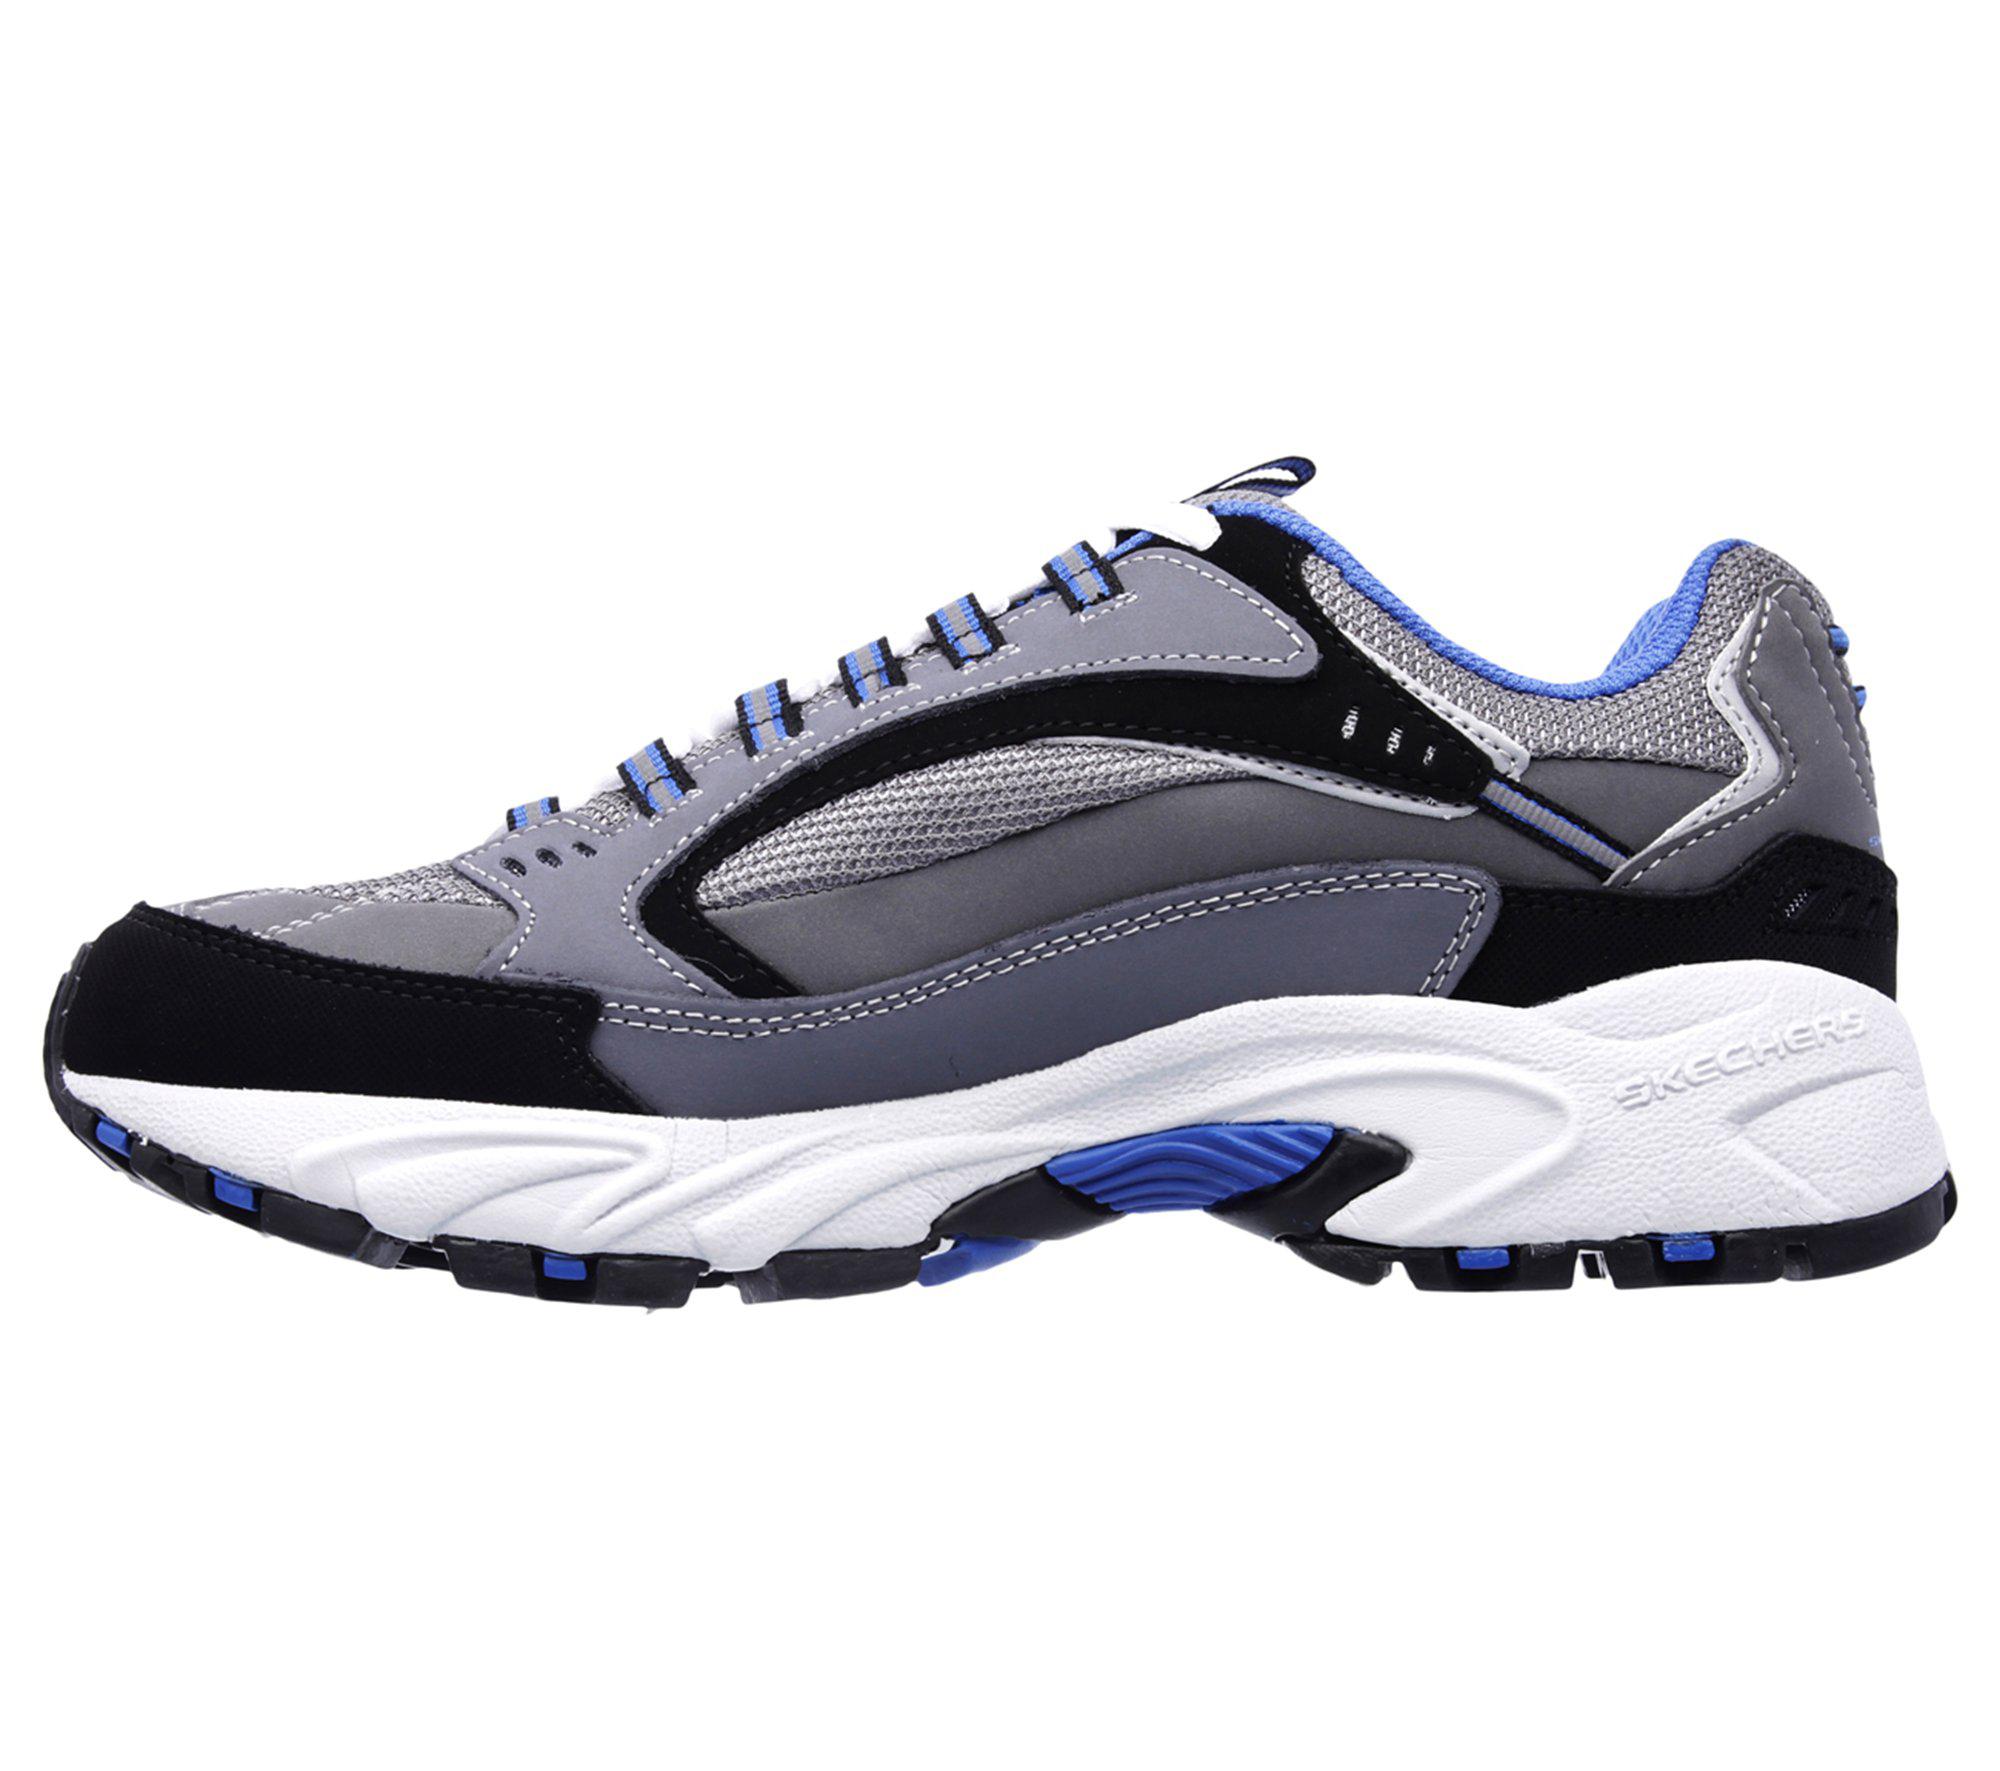 Skechers Leather - Cutback in Gray (Blue) for Men - Lyst